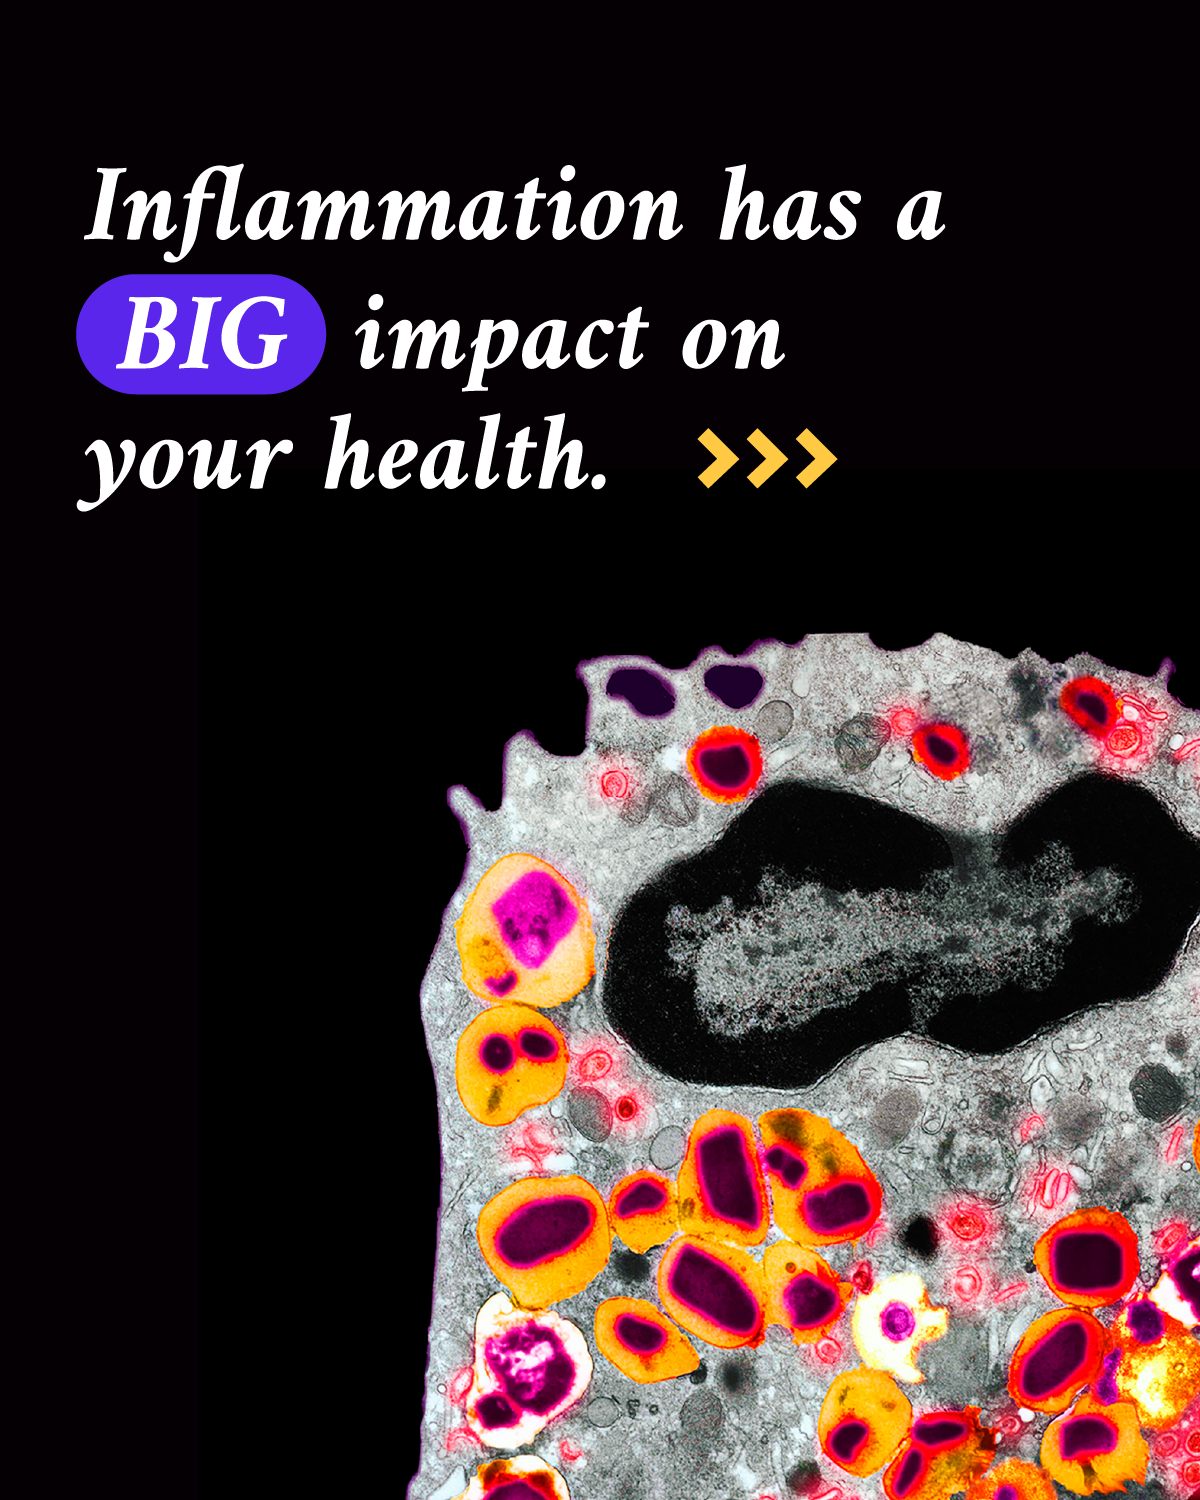 Infographic titled “Inflammation has a big impact on health.” A photo of a magnified eosinophilia immune cell using orange, pink and red colors to highlight different parts of the cell accompanies the text.